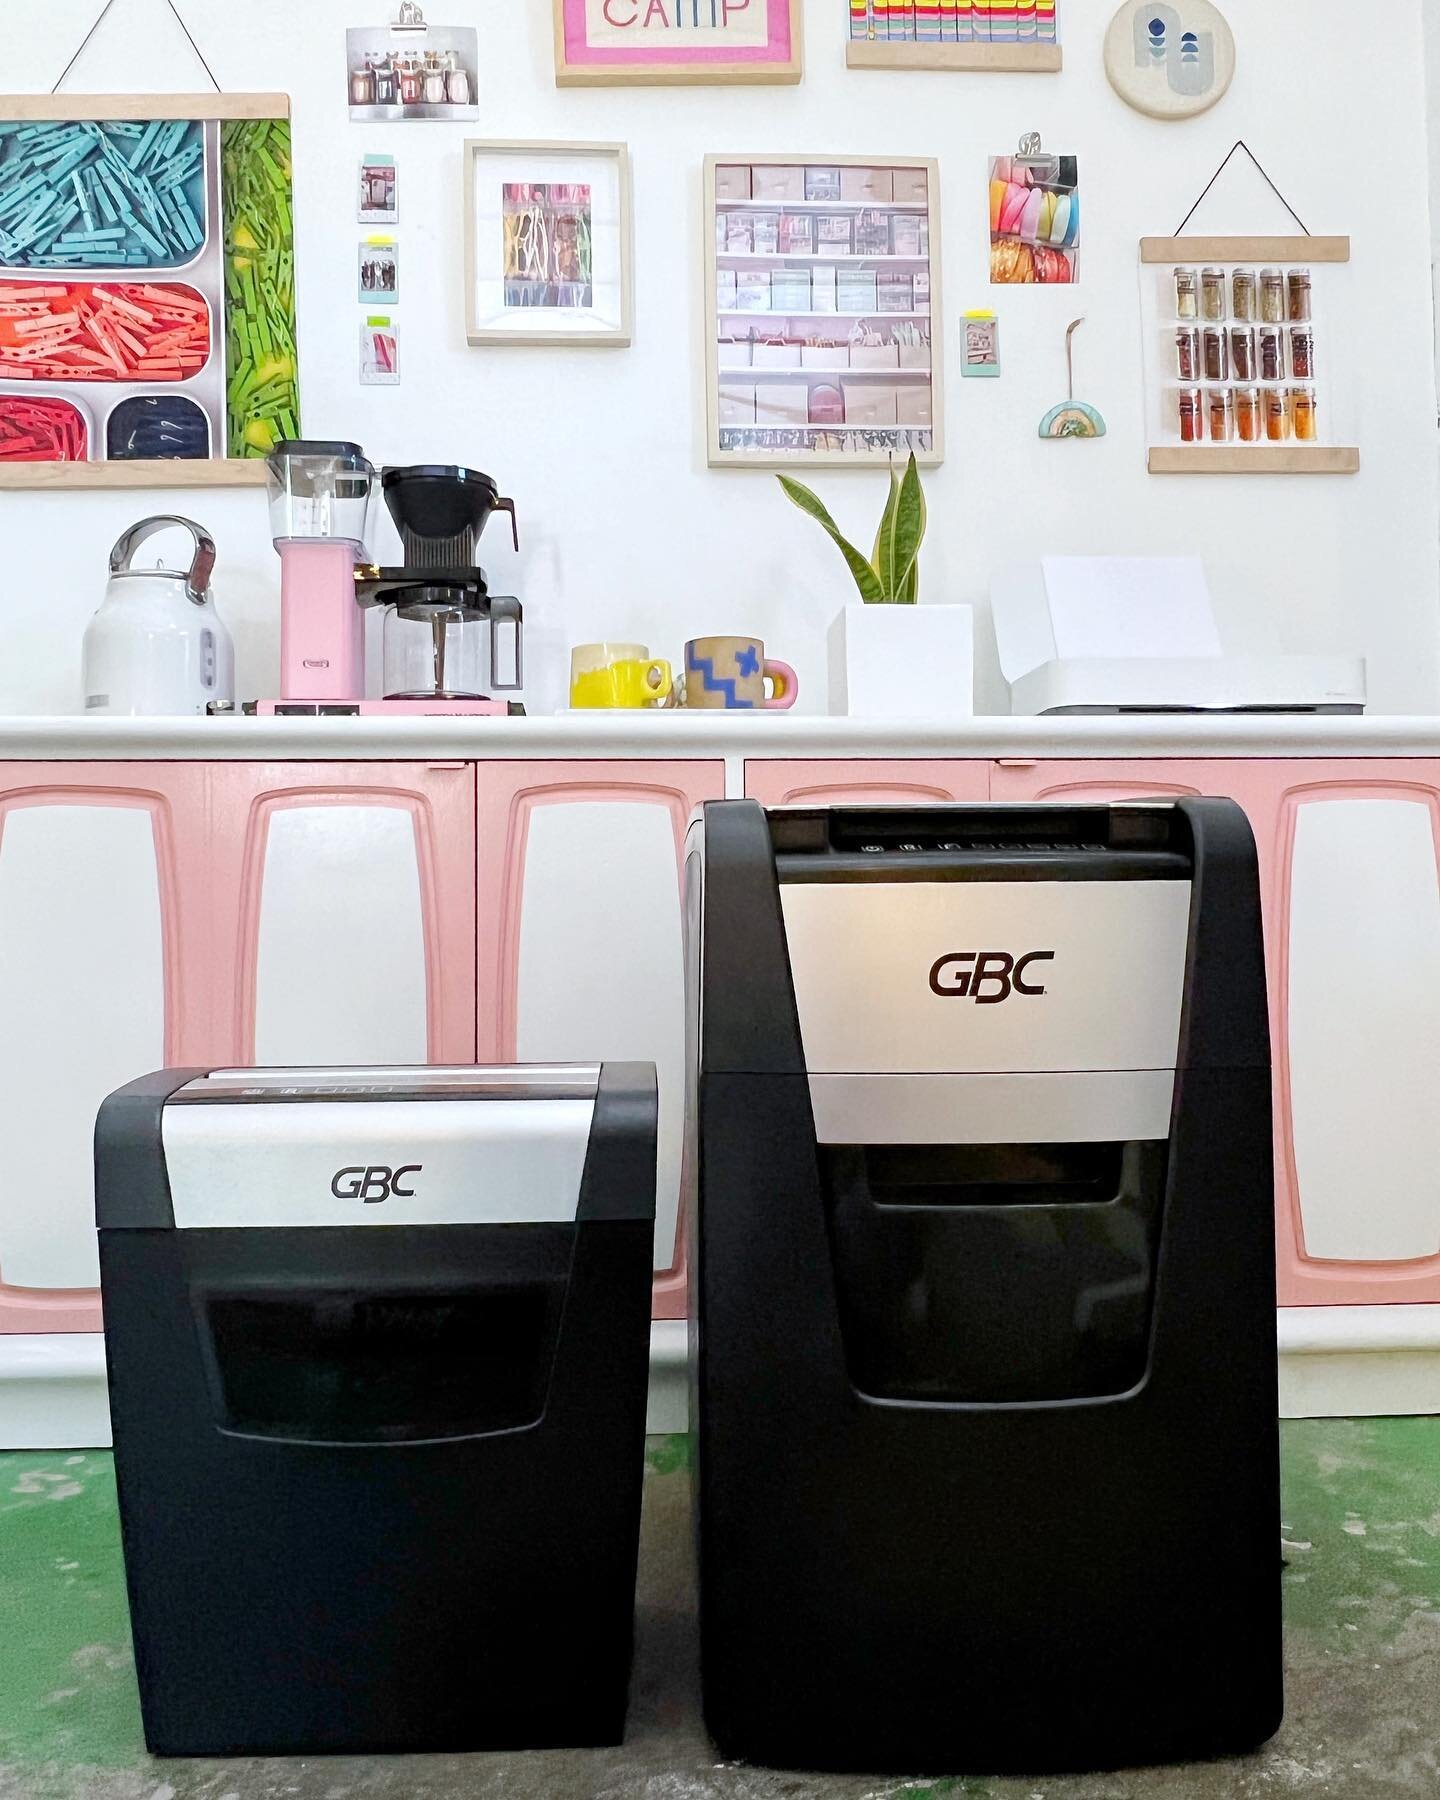 ✨ Giveaway Alert! ✨

One of our best tips for keeping paperwork in check is to keep a shredder handy at home and at the office! That way you can stay on top of junk mail, old files and bulky papers that take up space. Our favorite shredders are these